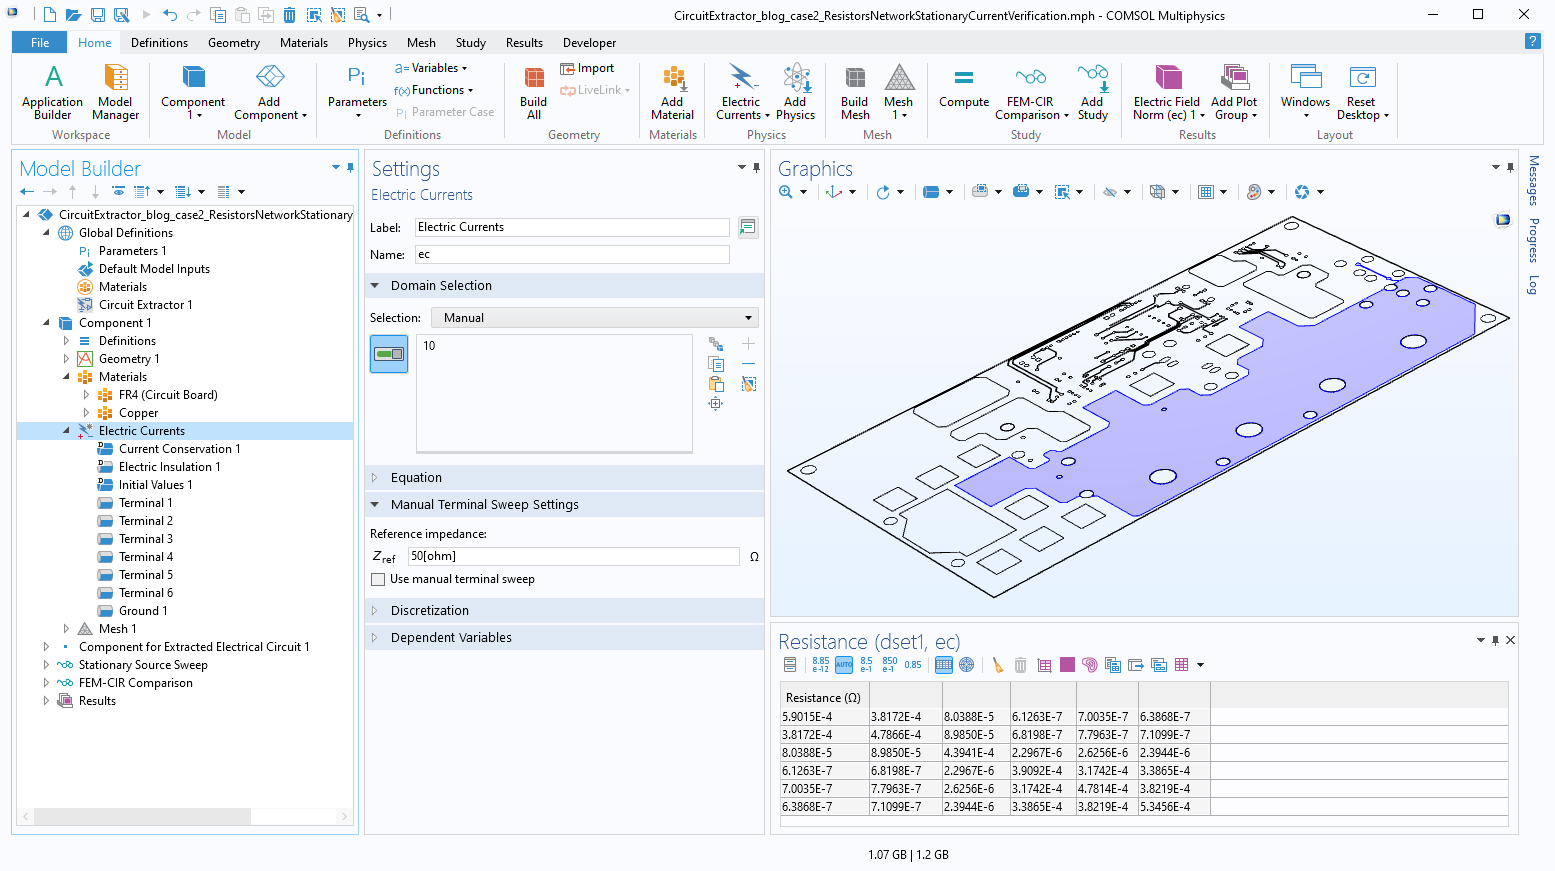 The COMSOL Multiphysics UI showing the Model Builder with the Electric Currents feature selected, the corresponding Settings window, and a planar circuit board model in the Graphics window.